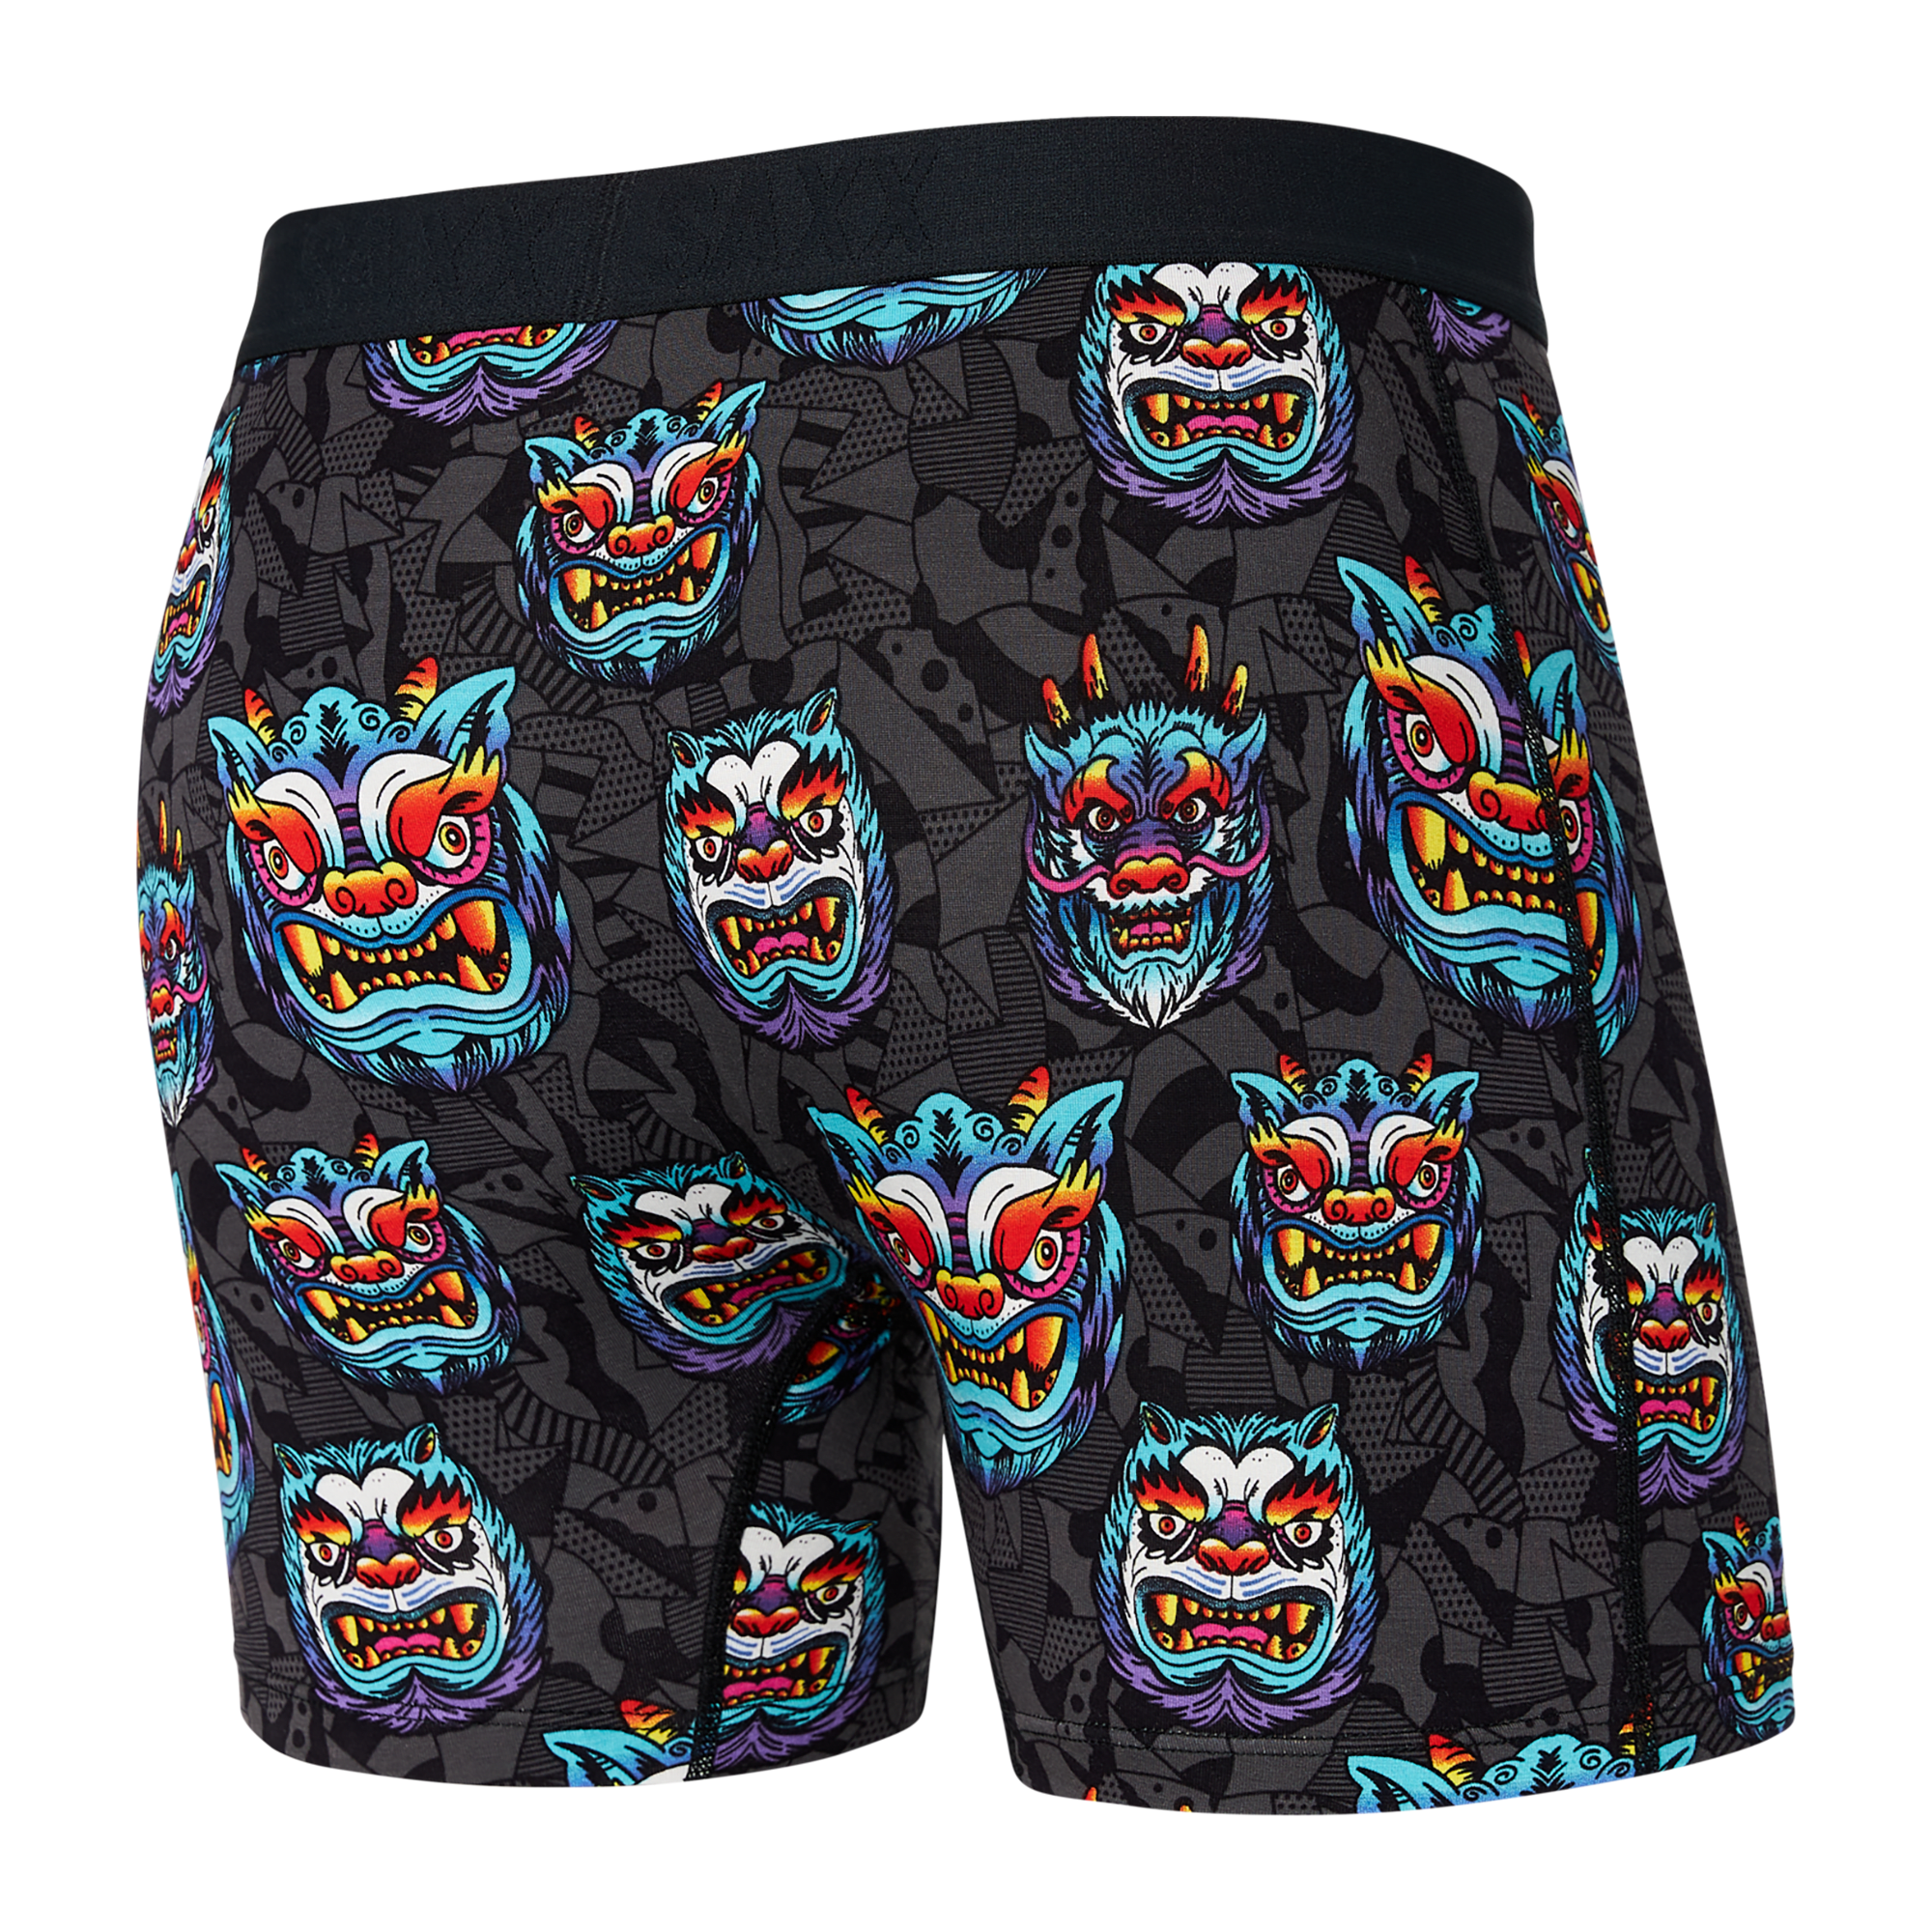 Boxer Saxx Vibe Year of the dragon